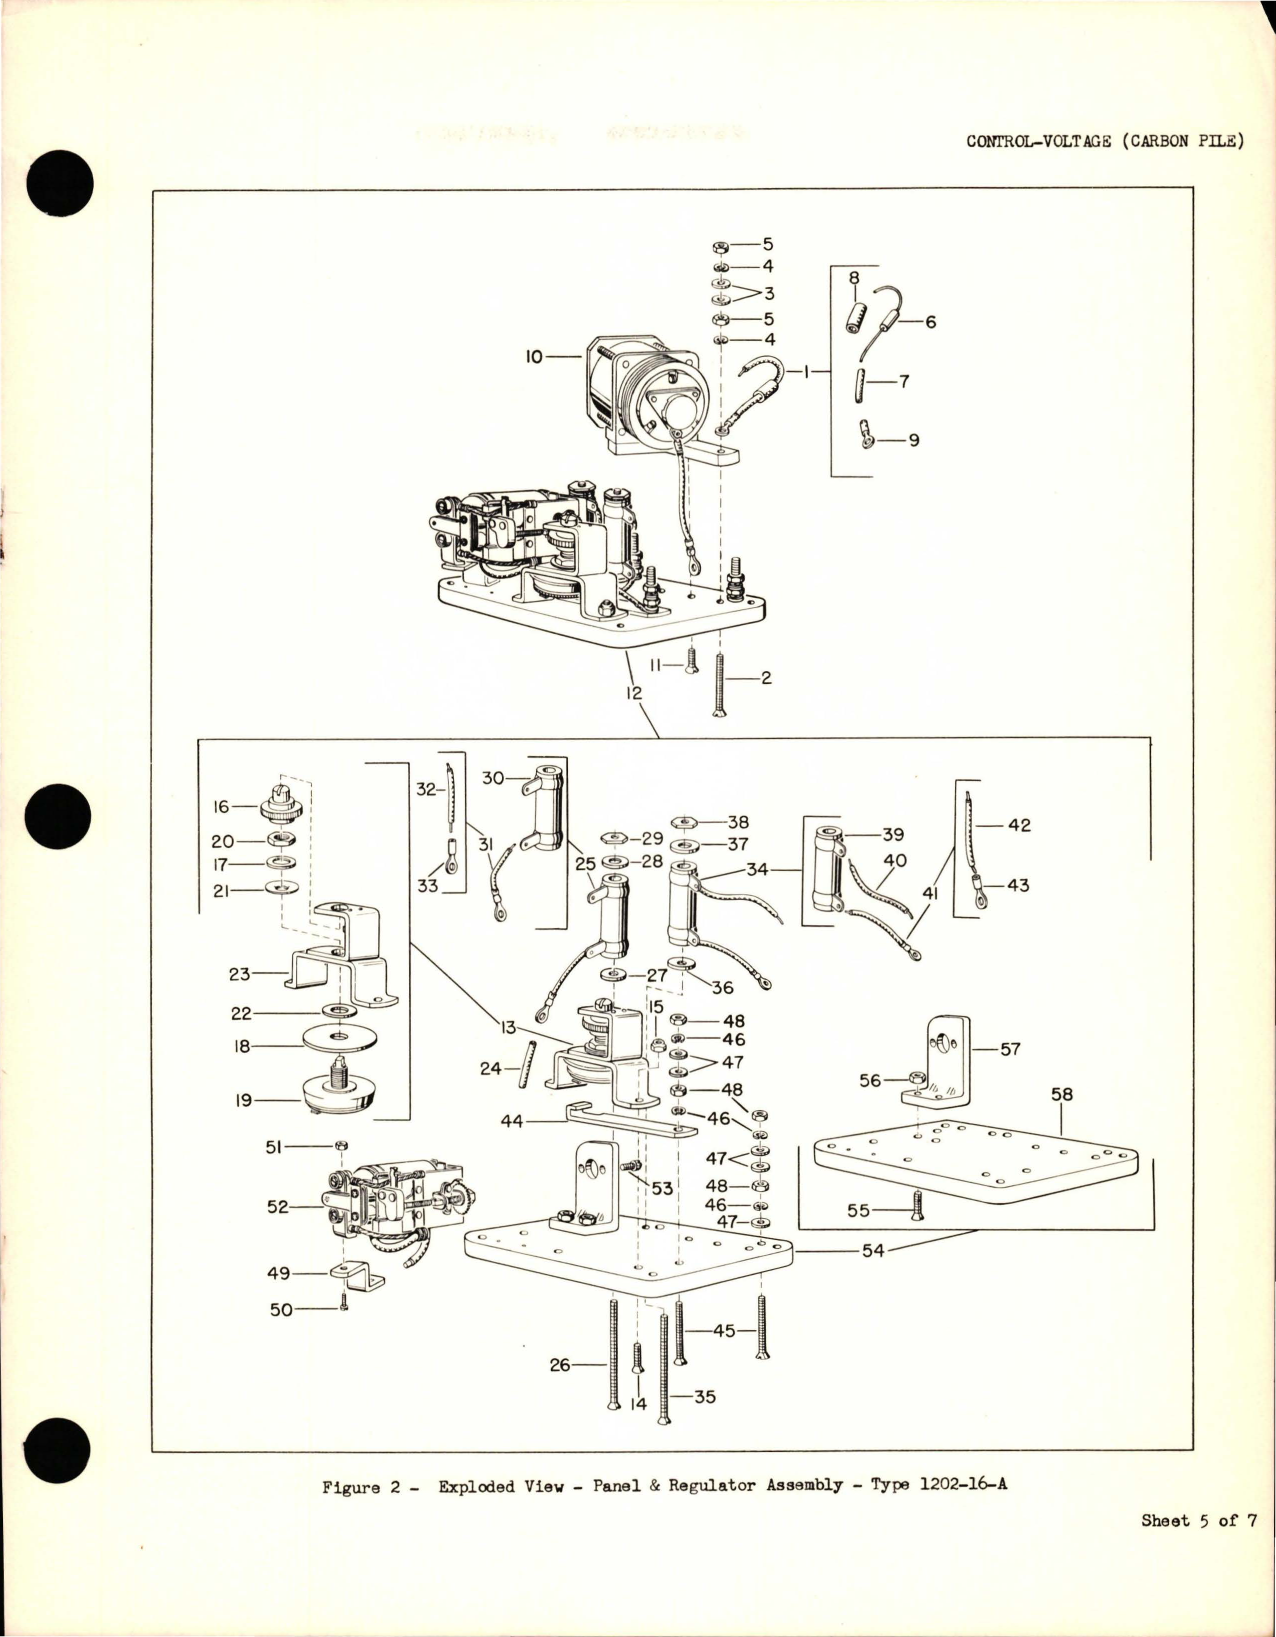 Sample page 5 from AirCorps Library document: Service Parts List for Control Voltage (Carbon Pile) - 1202-16-A